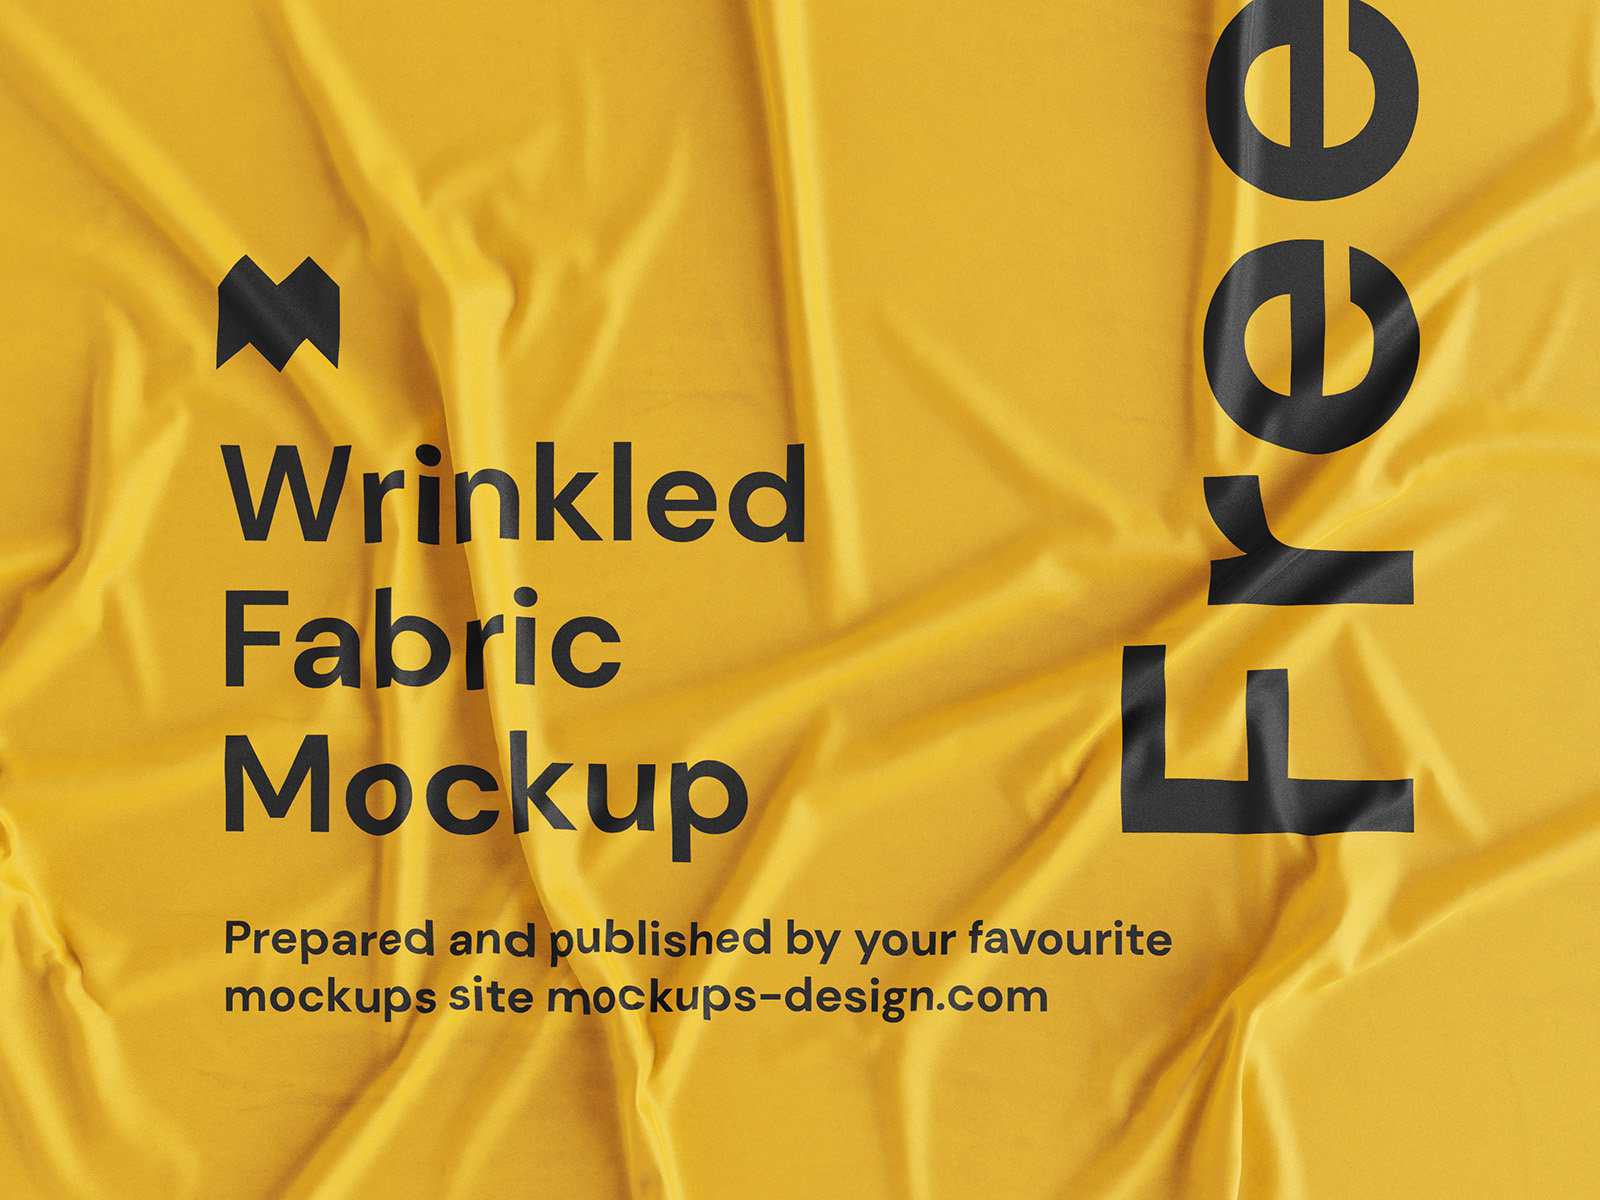 4 Wrinkled Fabric Mockups in Close-up Sight FREE PSD